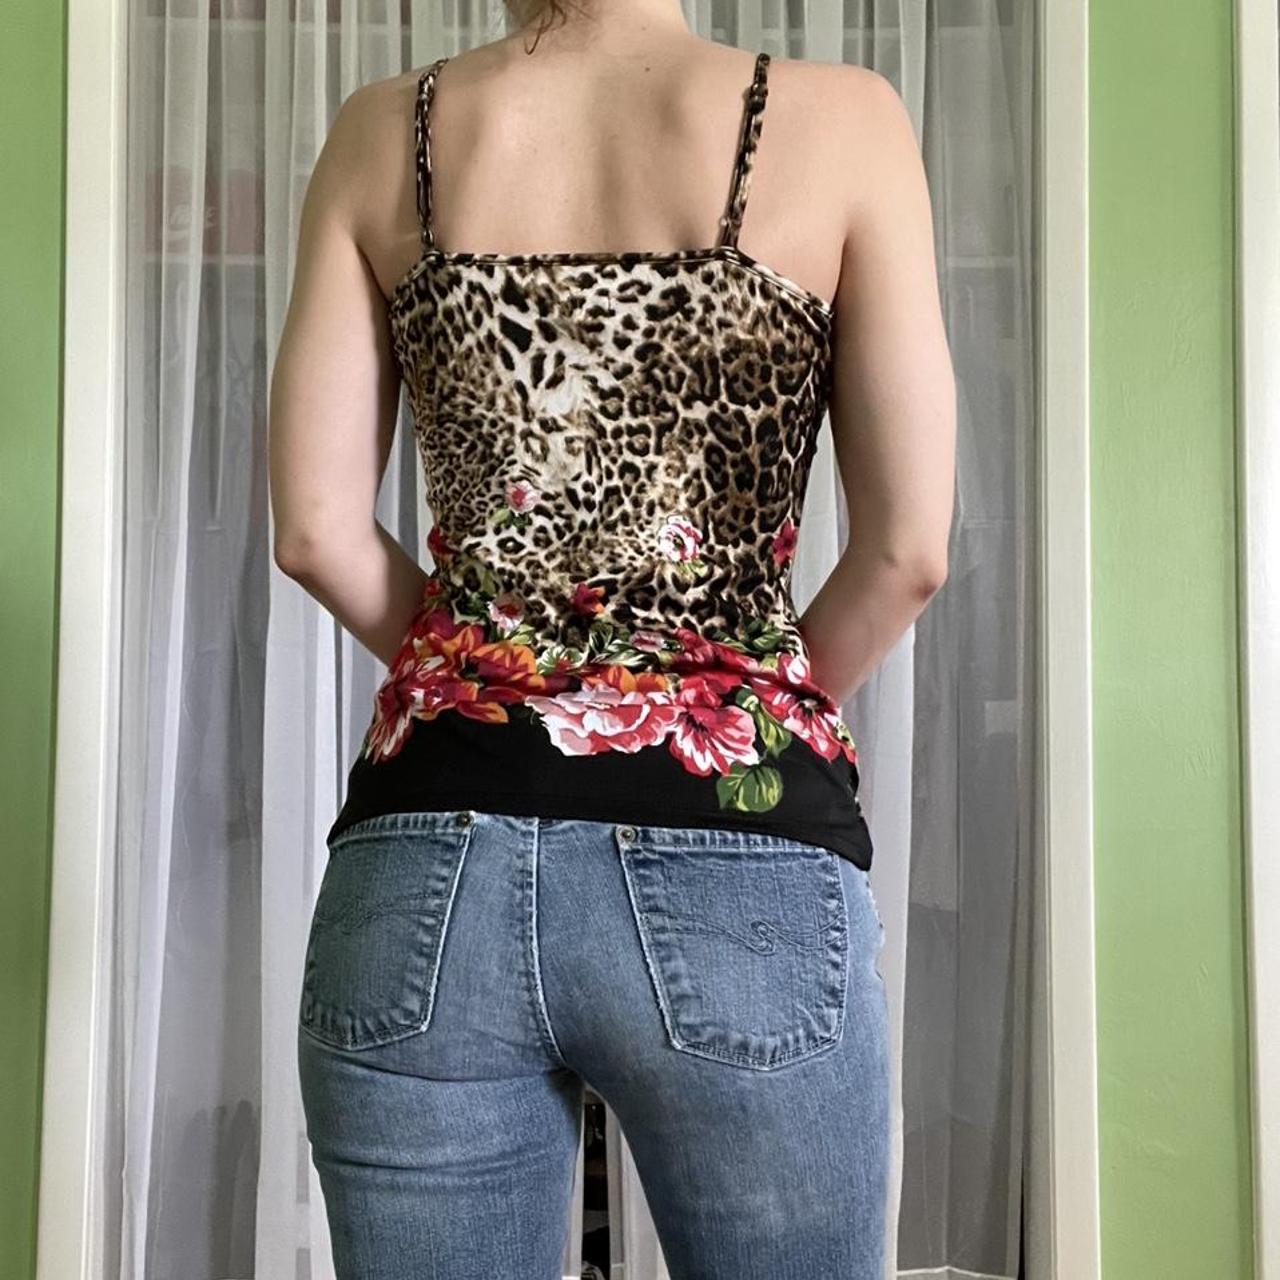 Product Image 3 - CHEETAH FLORAL LACEY TANK TOP

-